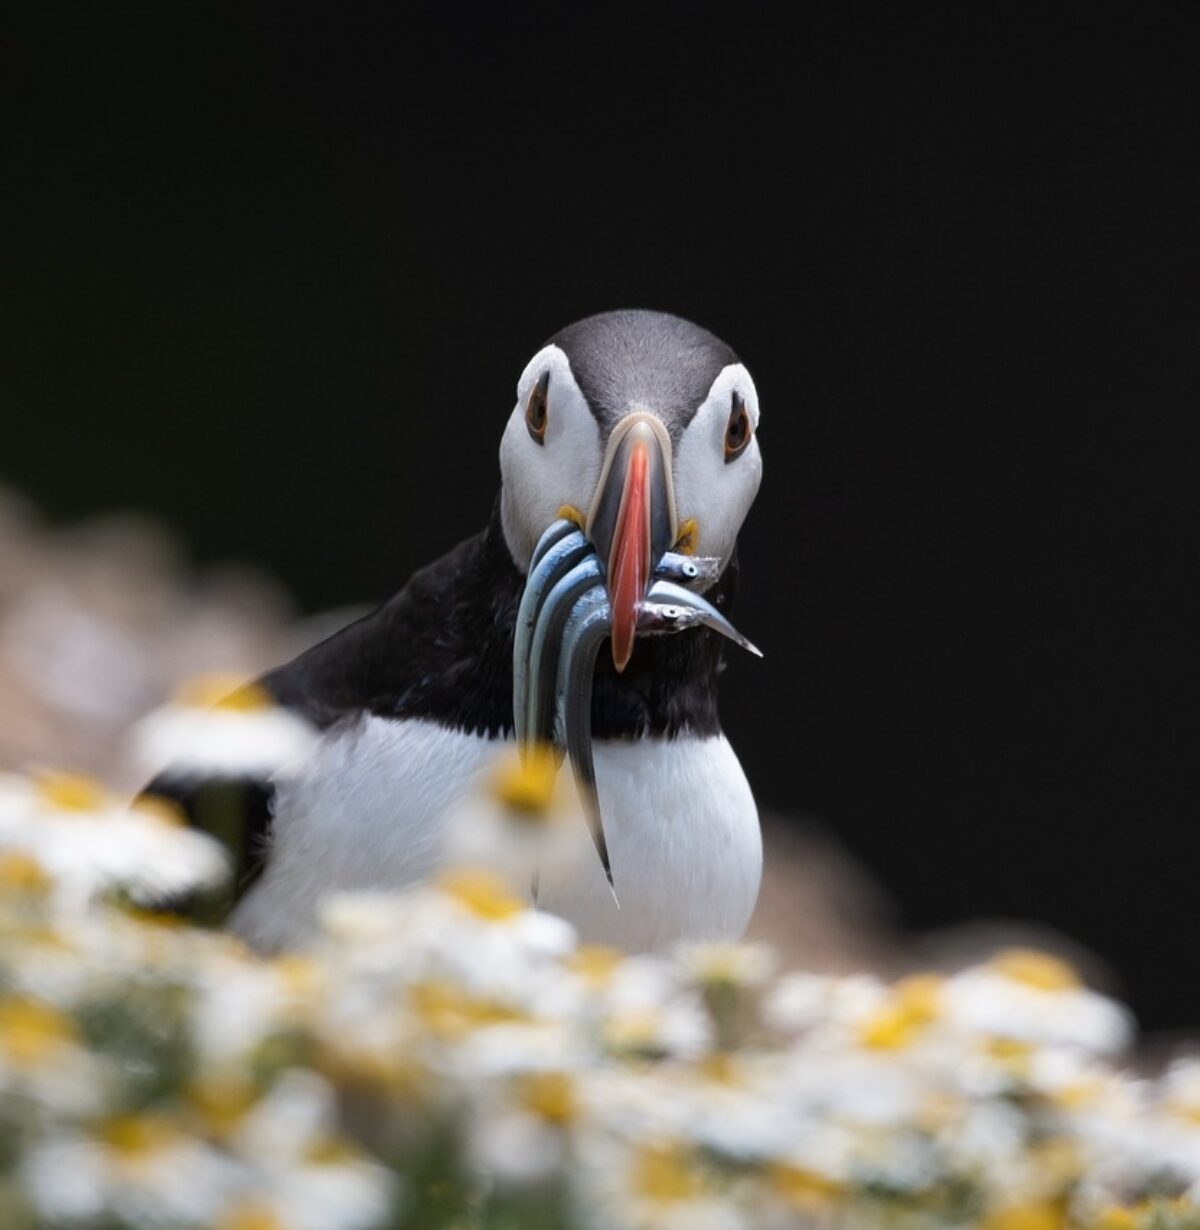 Puffin with small fish in its mouth